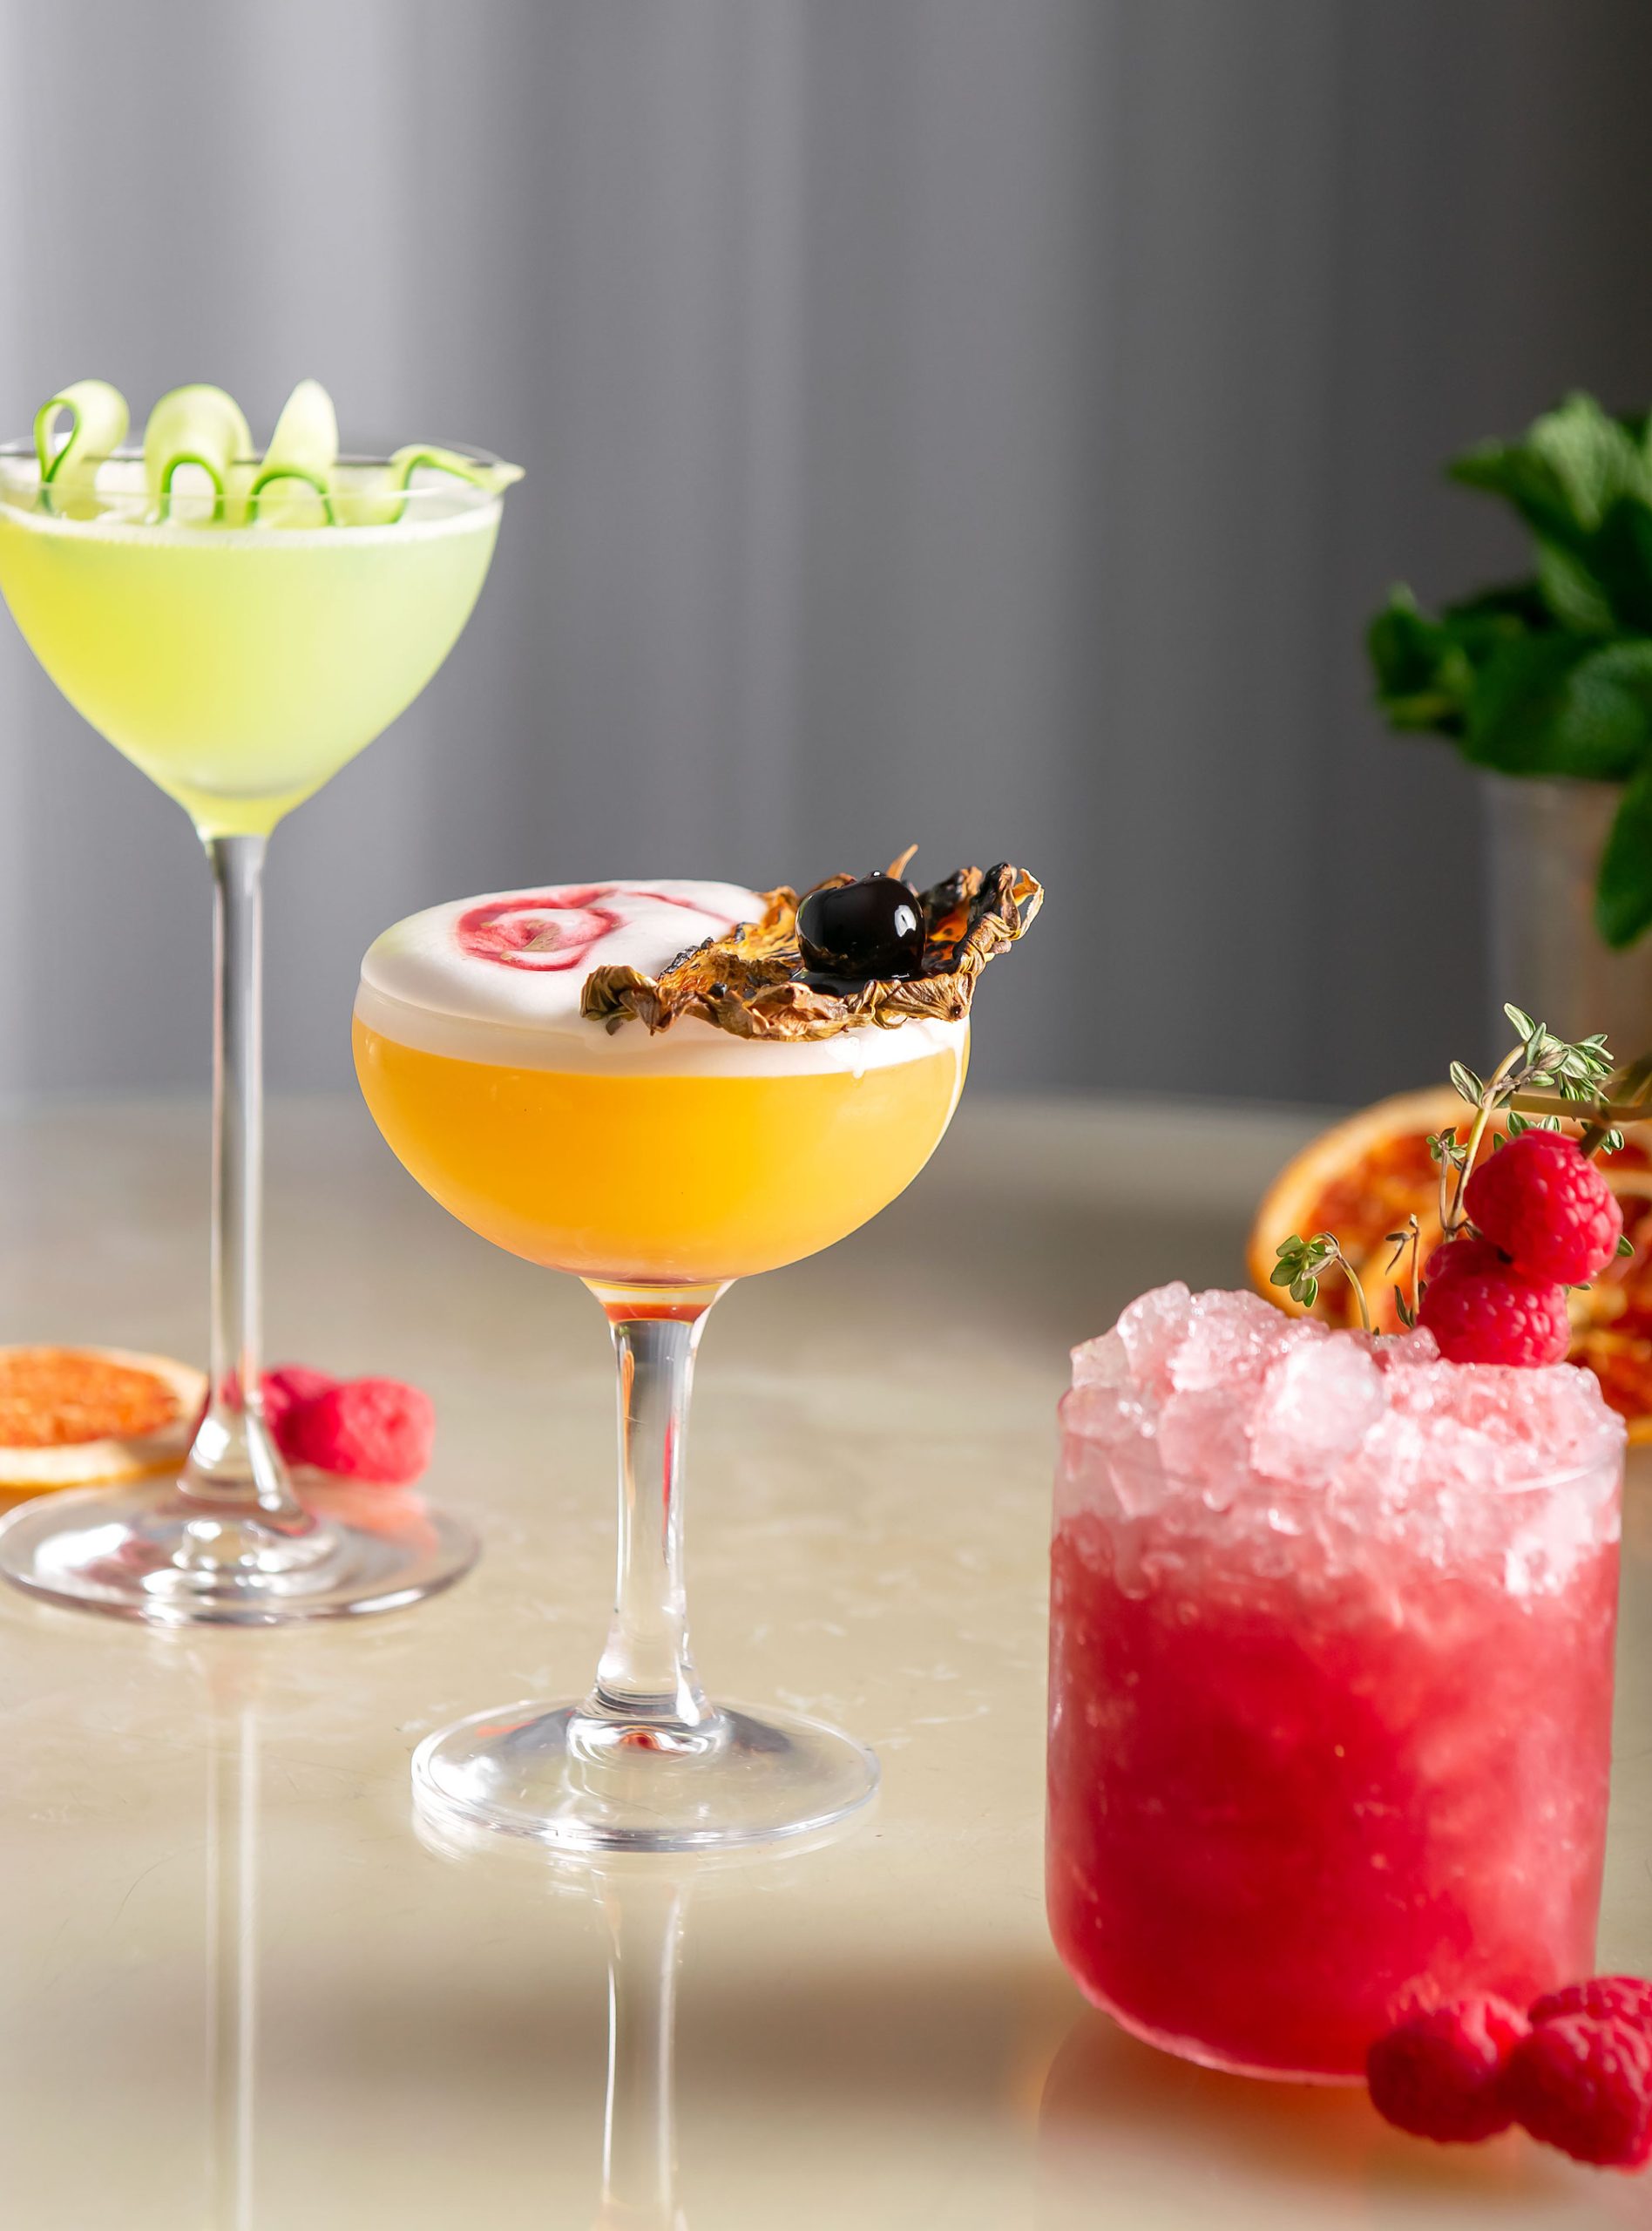 One tall green cocktail, a short orange cocktail, and icey red cocktail all with garnishes sit on beige table